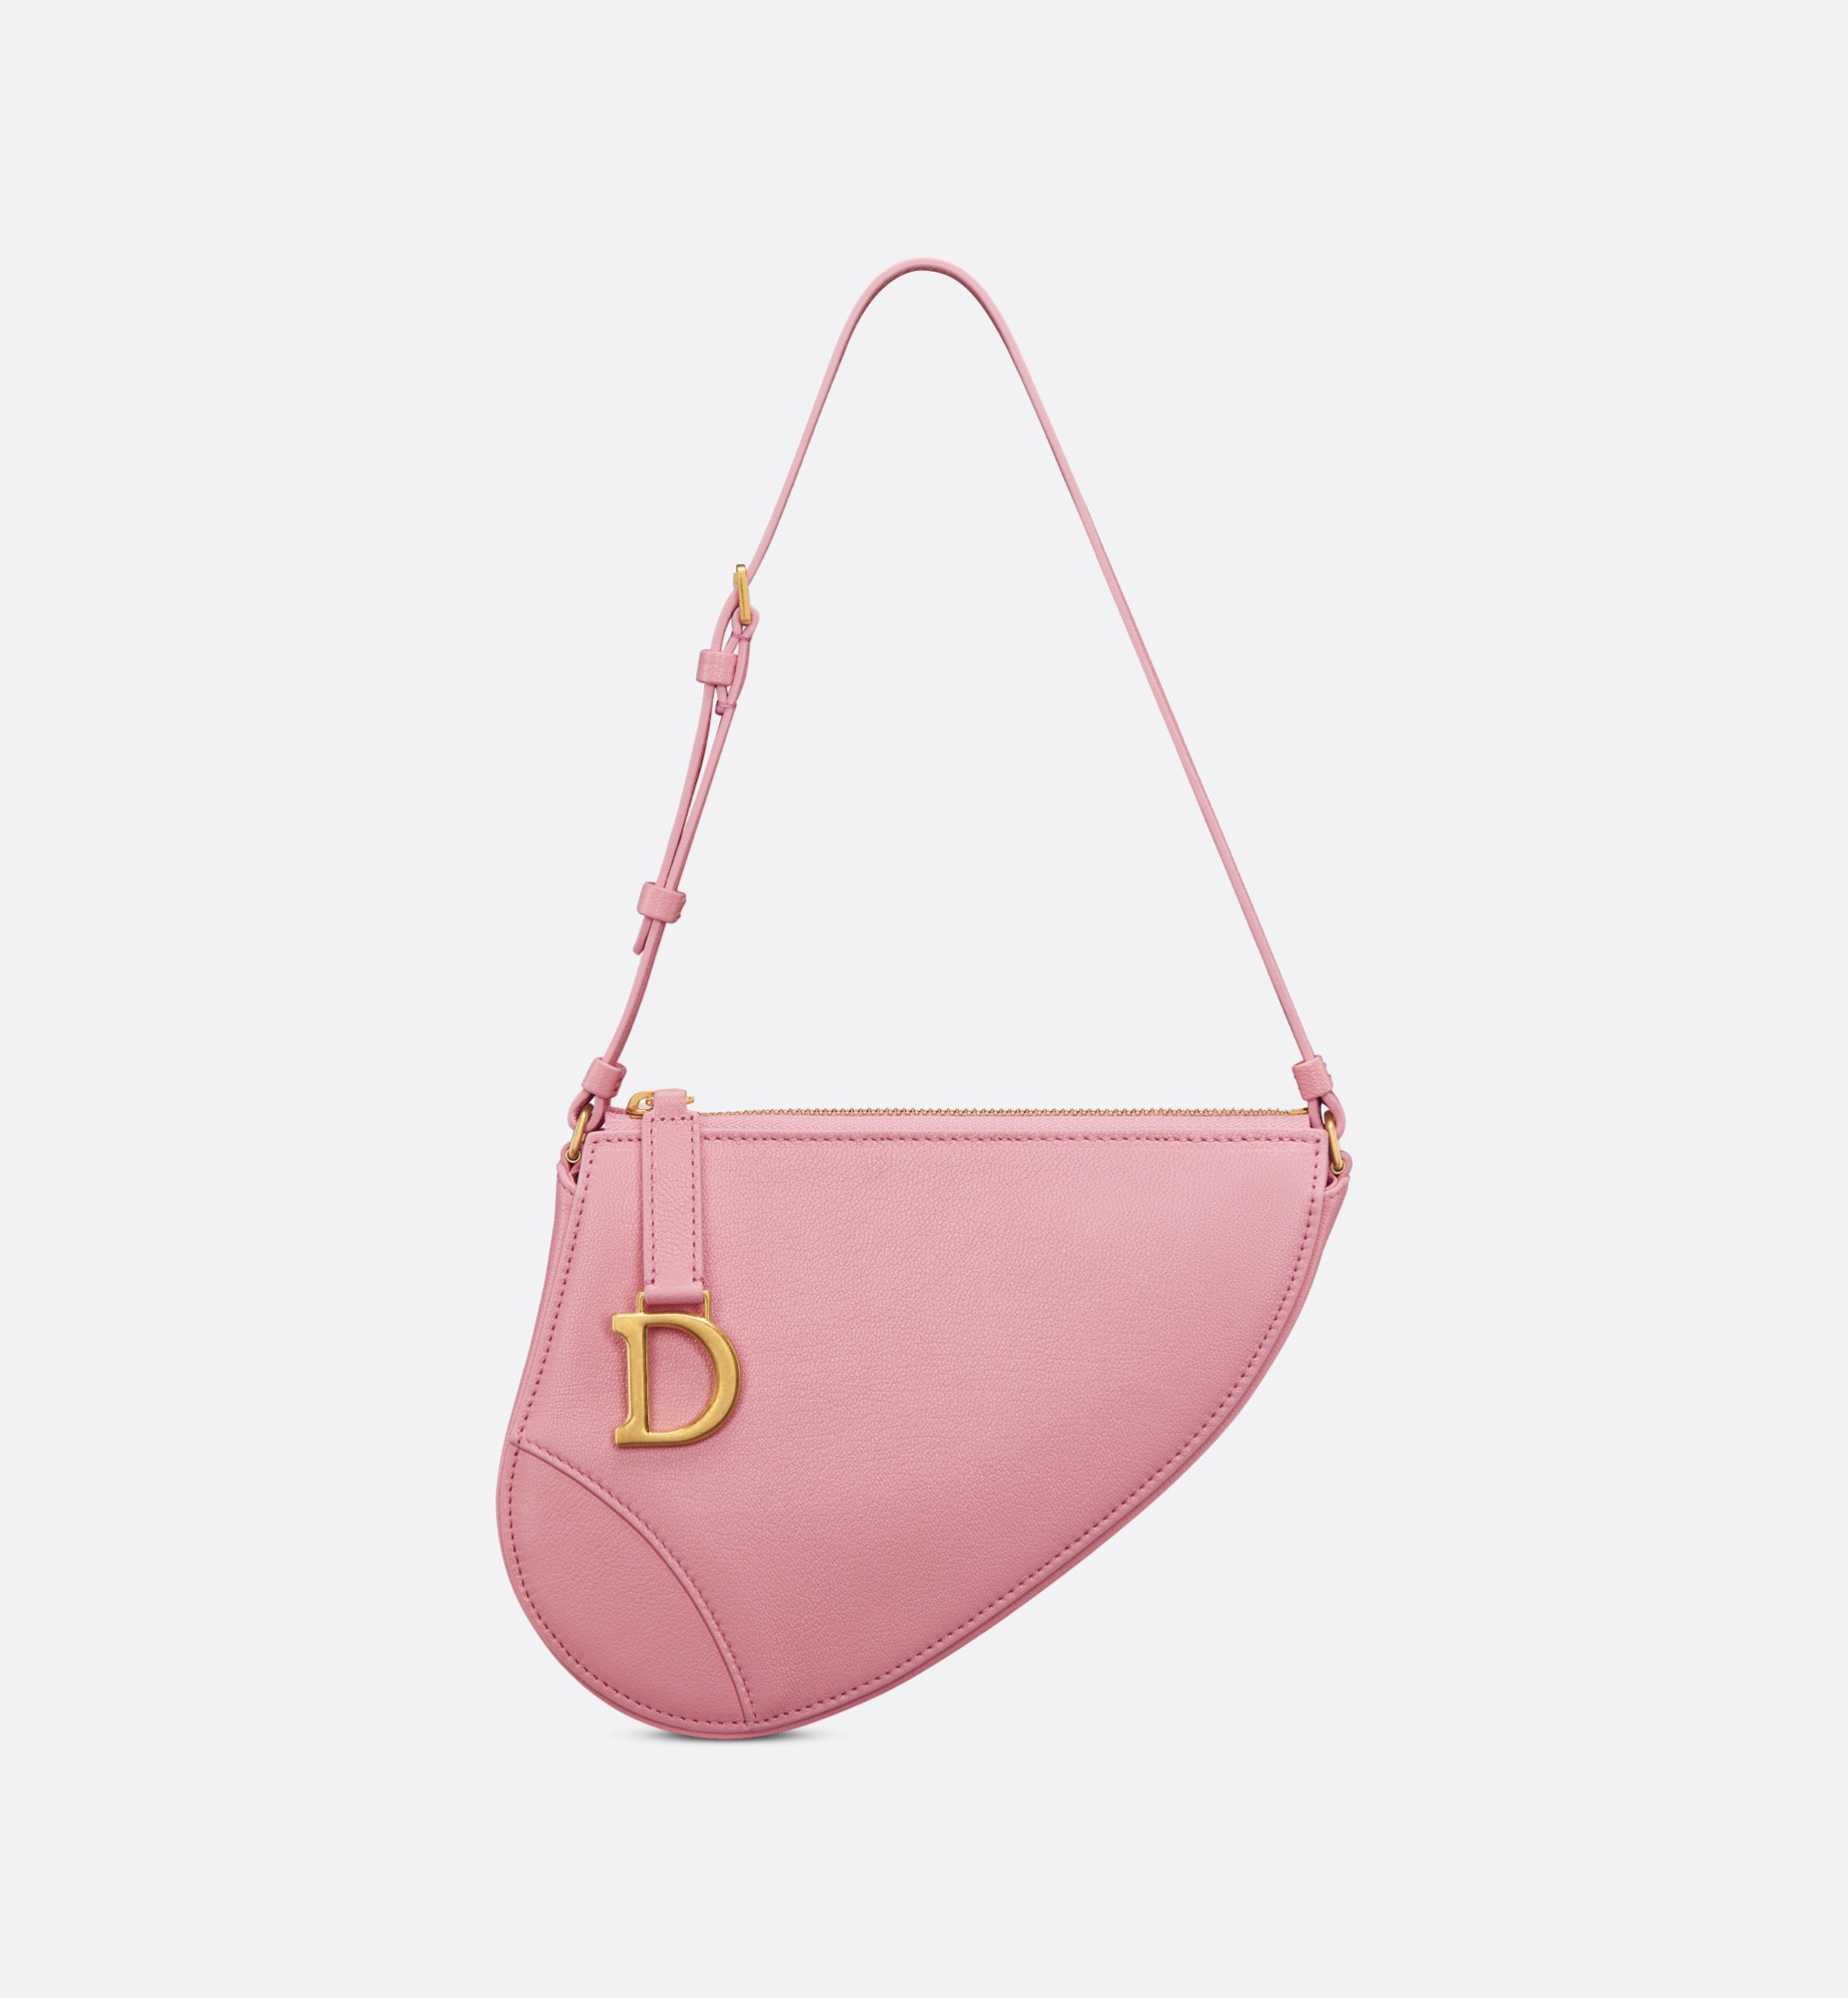 Saddle Shoulder Pouch Melocoton Pink Goatskin christian dior saddle pouch with strap dior saddle pouch bag dior saddle pouch black dior shoulder bag